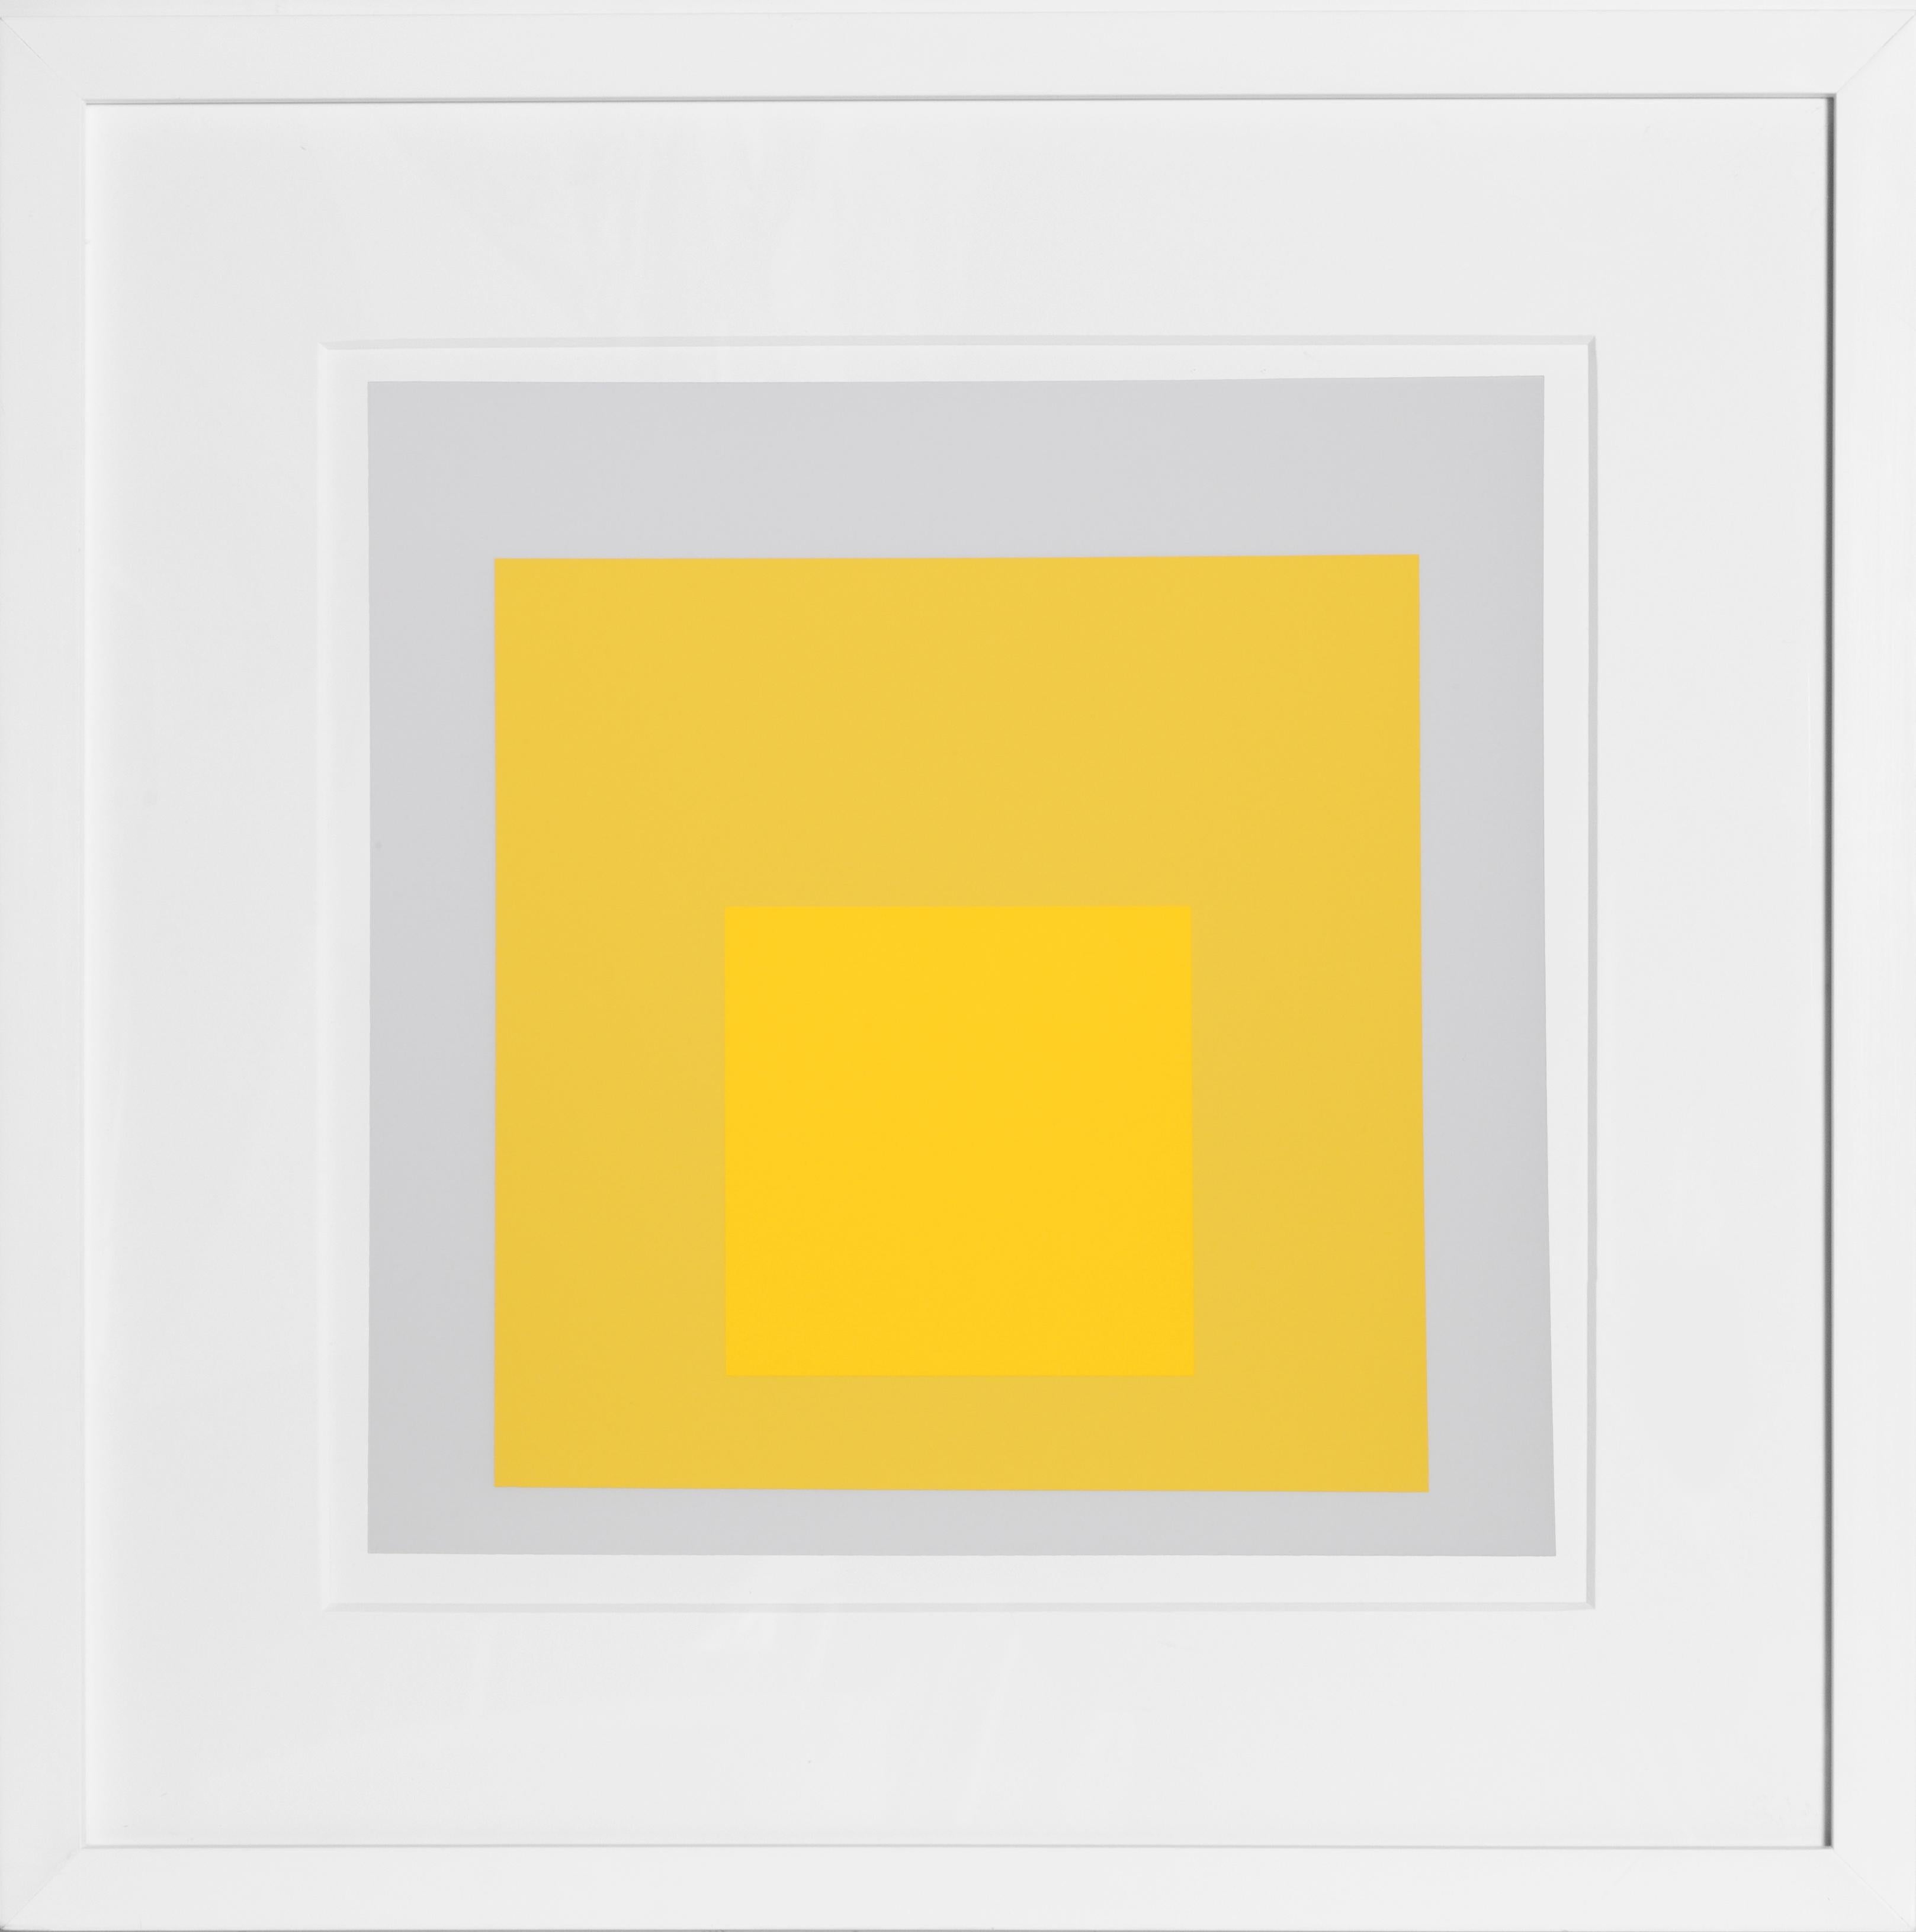 Josef Albers Abstract Print - Homage to the Square - P2, F4, I2